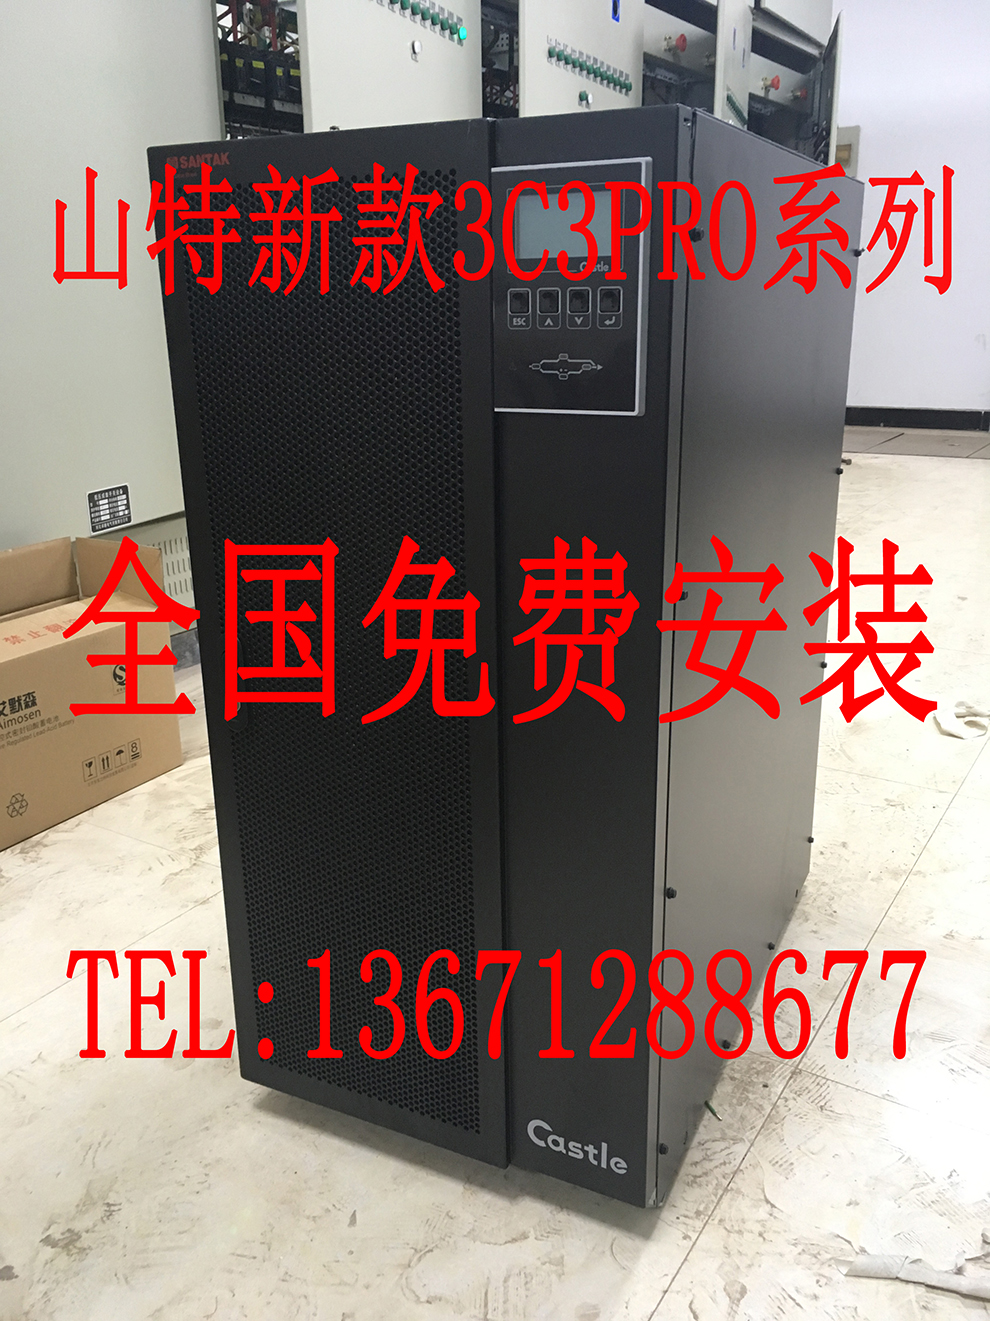 Shante 3C3 PRO-30KS three-in-three-out 30KVA/27KW UPS uninterruptible power supply for on-line computer room